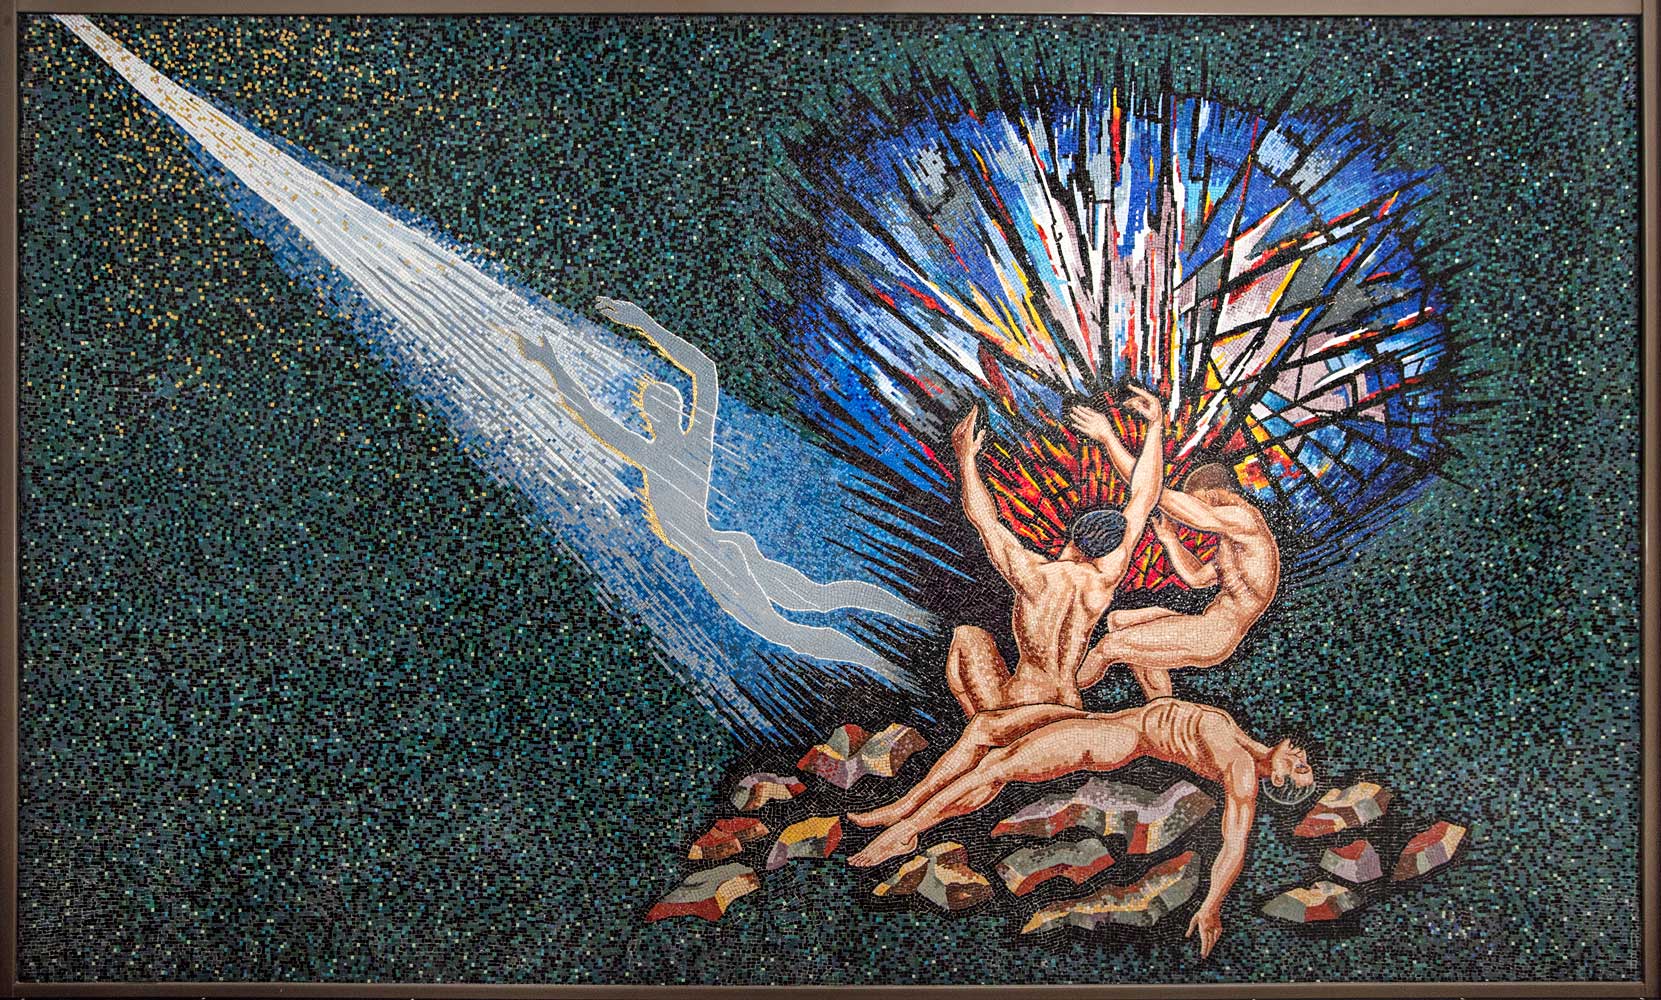 Mosaic of depicting three naked figures and a soul-like fourth ascending towards a stylised vision of heaven from a rocky outcrop.